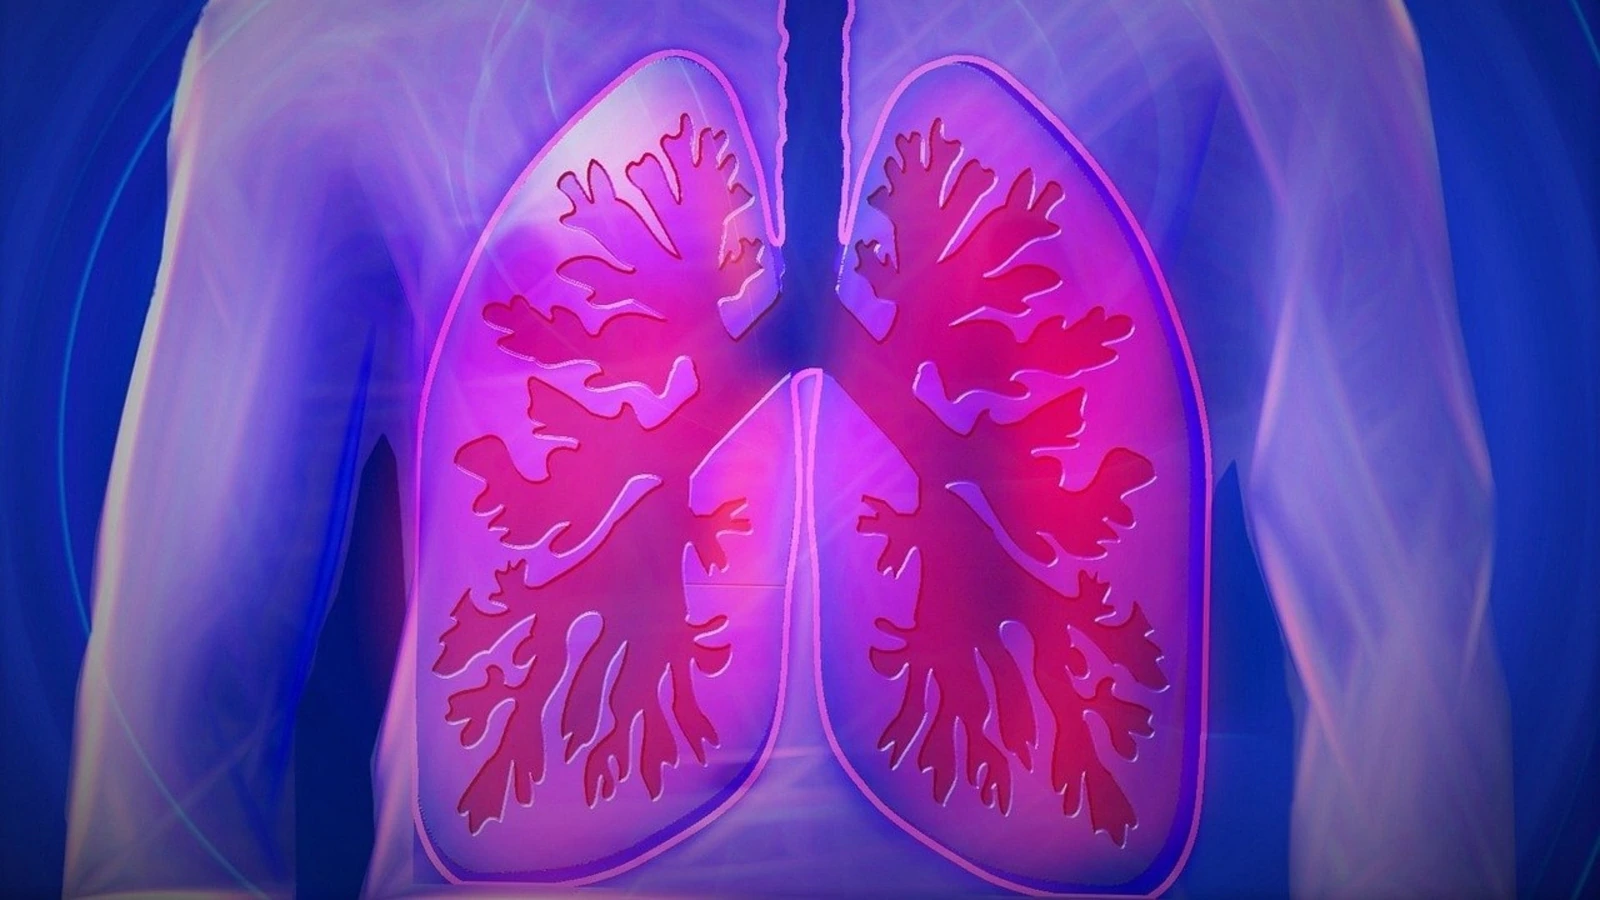 Air pollution: Management tips for people suffering from lung or other forms of health problems